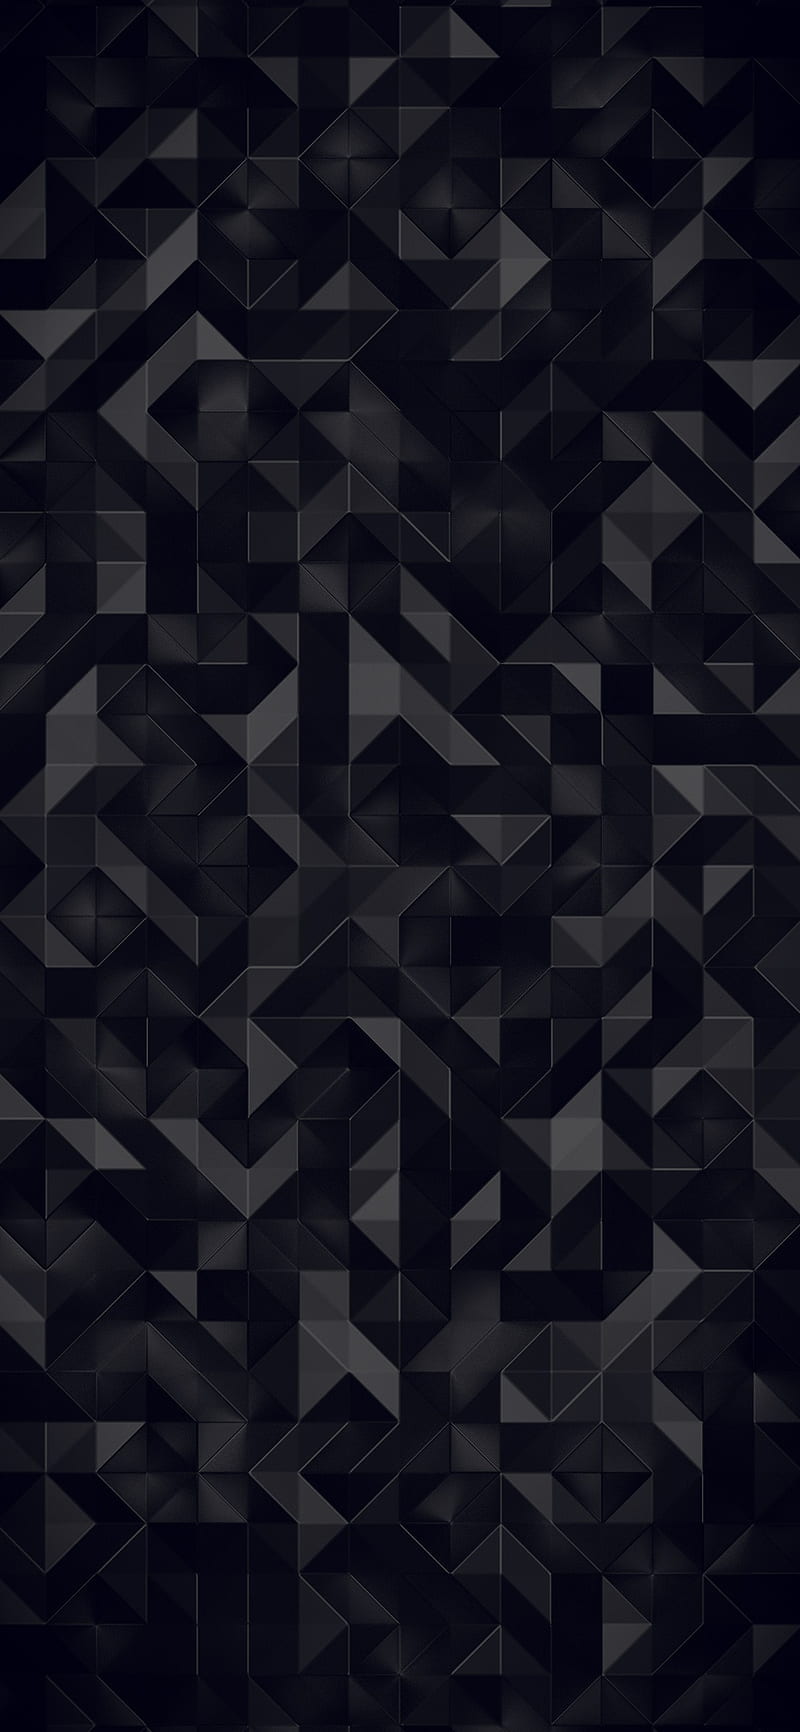 1290x2796px, 2K free download | Polygon, 3d, abstract, background ...